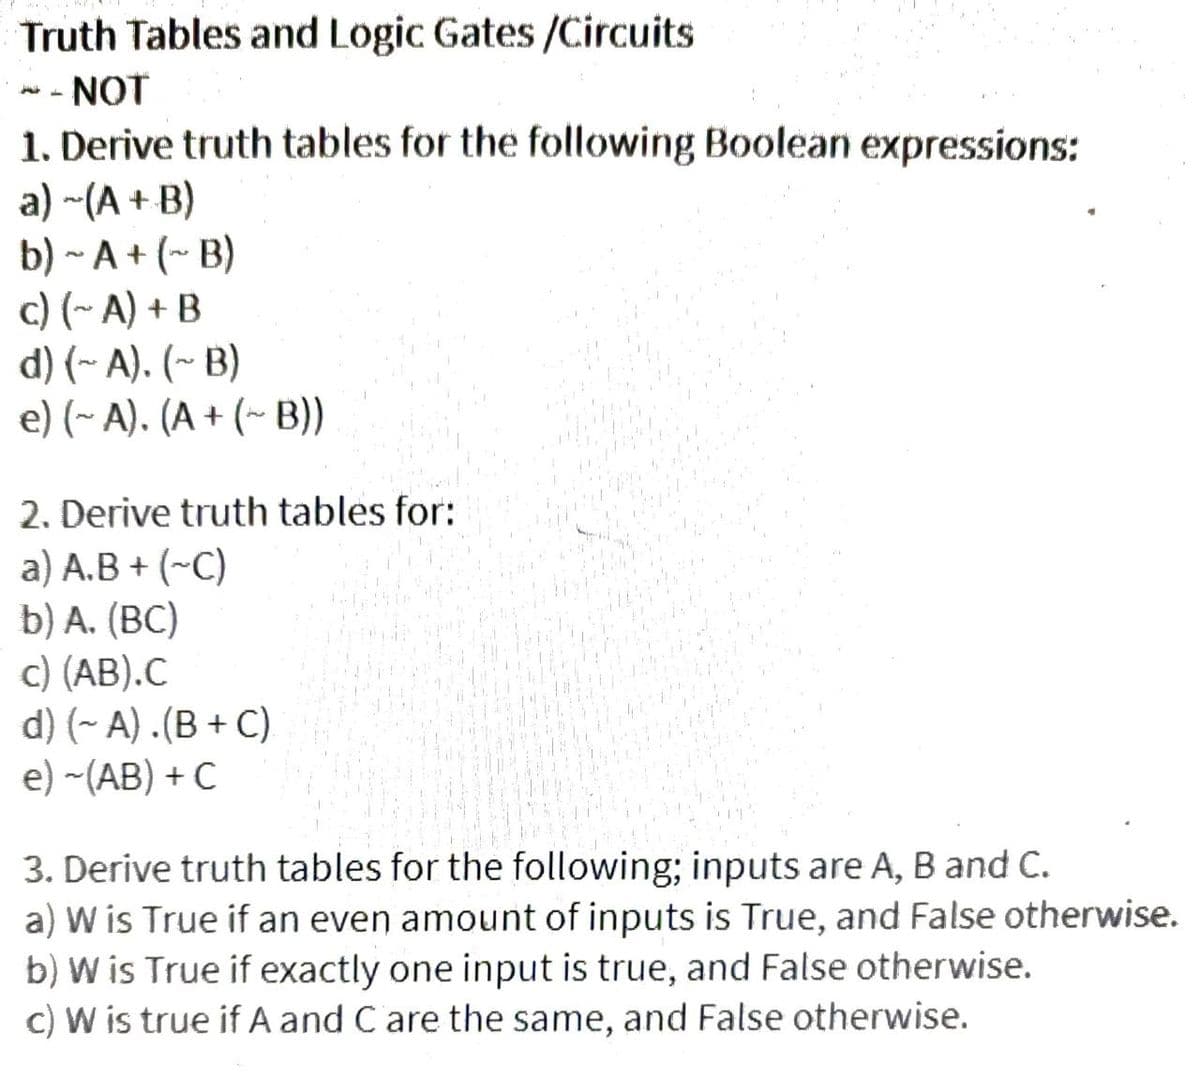 Truth Tables and Logic Gates /Circuits
NOT
1. Derive truth tables for the following Boolean expressions:
a) ~(A + B)
b) ~ A+ (~ B)
c) (~A) + B
d) (~A). (~B)
e) (~ A). (A + (~ B))
H
2. Derive truth tables for:
a) A.B + (~C)
b) A. (BC)
c) (AB).C
d) (~ A).(B+C)
e) -(AB) + C
3. Derive truth tables for the following; inputs are A, B and C.
a) W is True if an even amount of inputs is True, and False otherwise.
b) W is True if exactly one input is true, and False otherwise.
c) W is true if A and C are the same, and False otherwise.